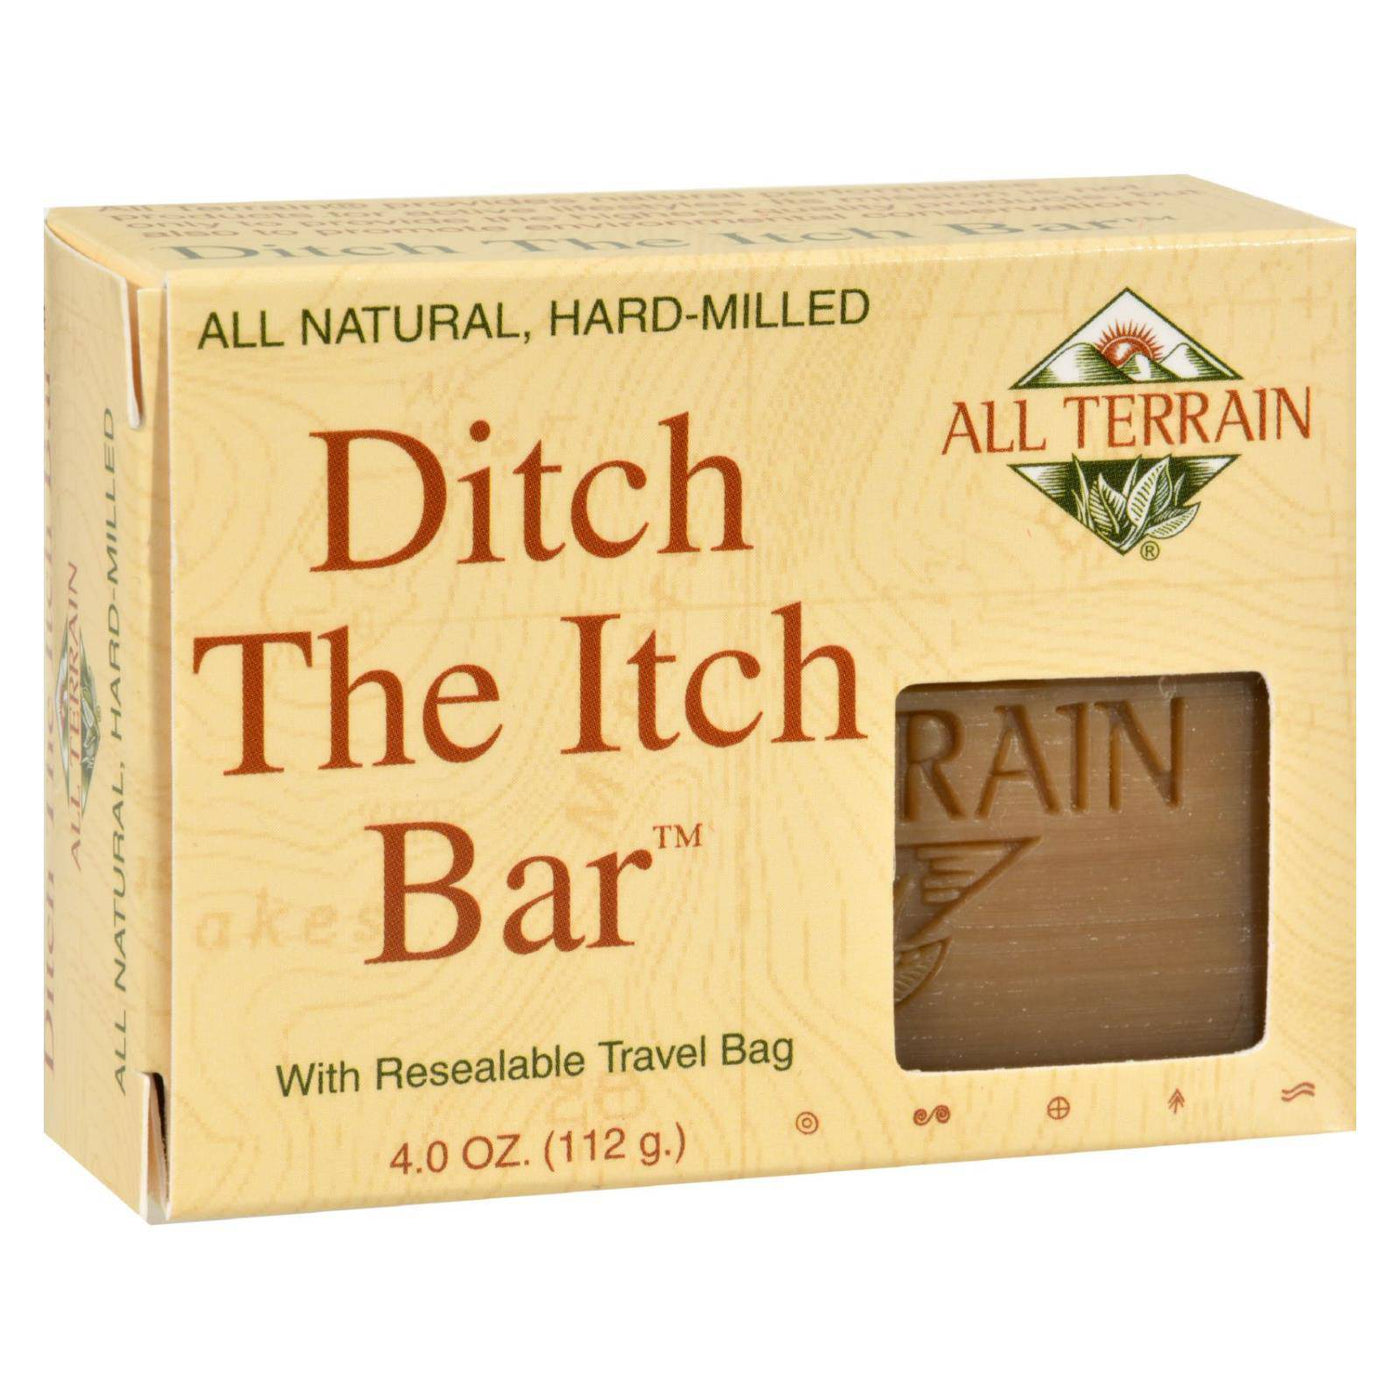 All Terrain - Ditch The Itch Bar - 4 Oz | OnlyNaturals.us